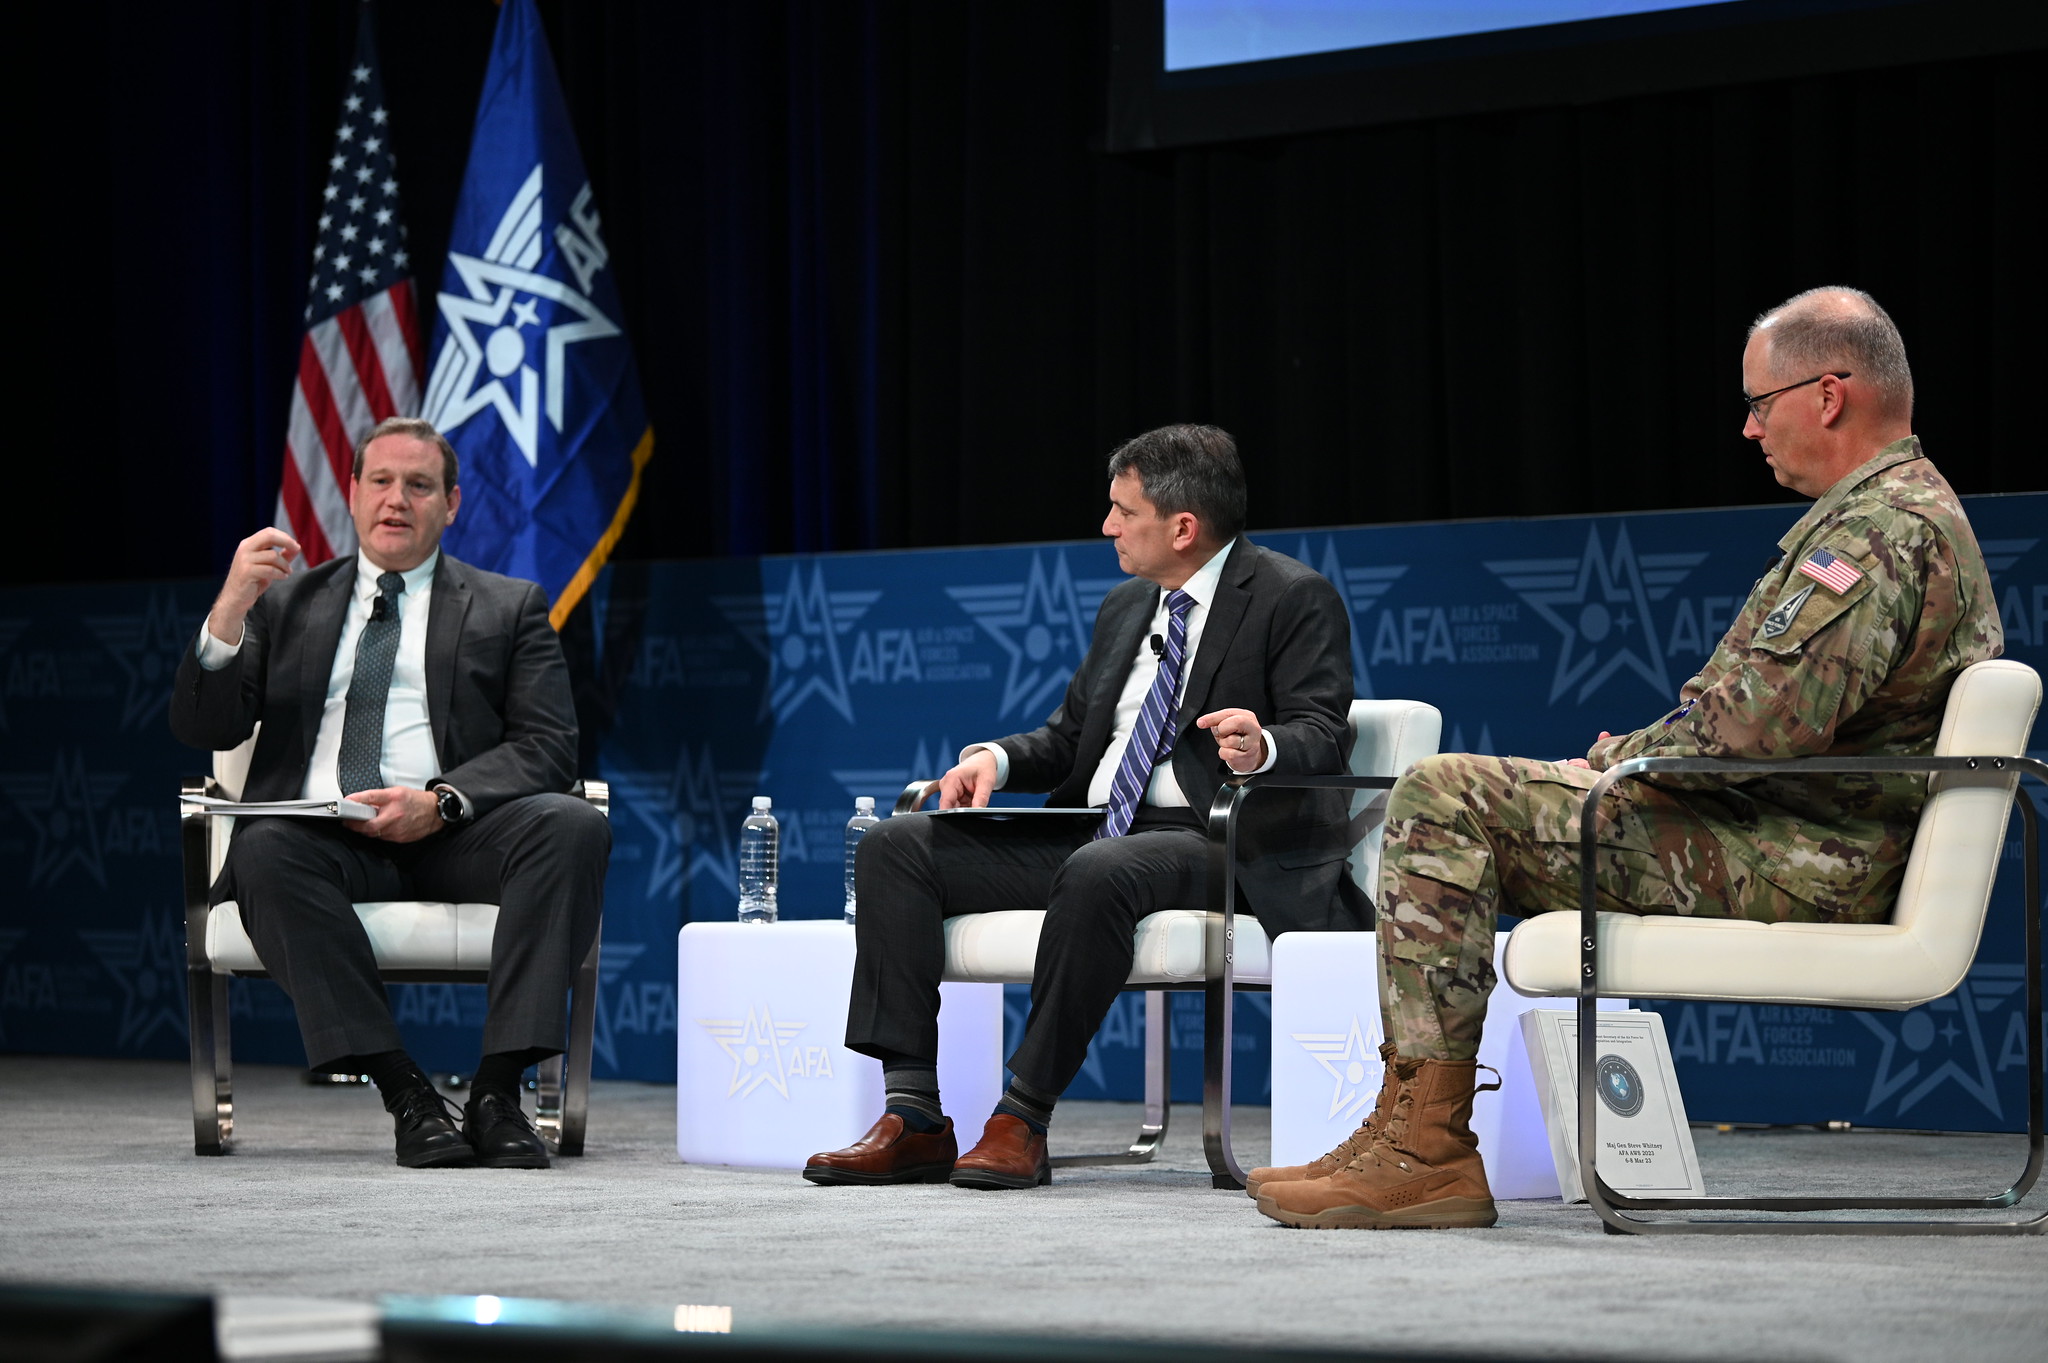 Watch, Read: ‘Answering the Warfighters’ Needs’